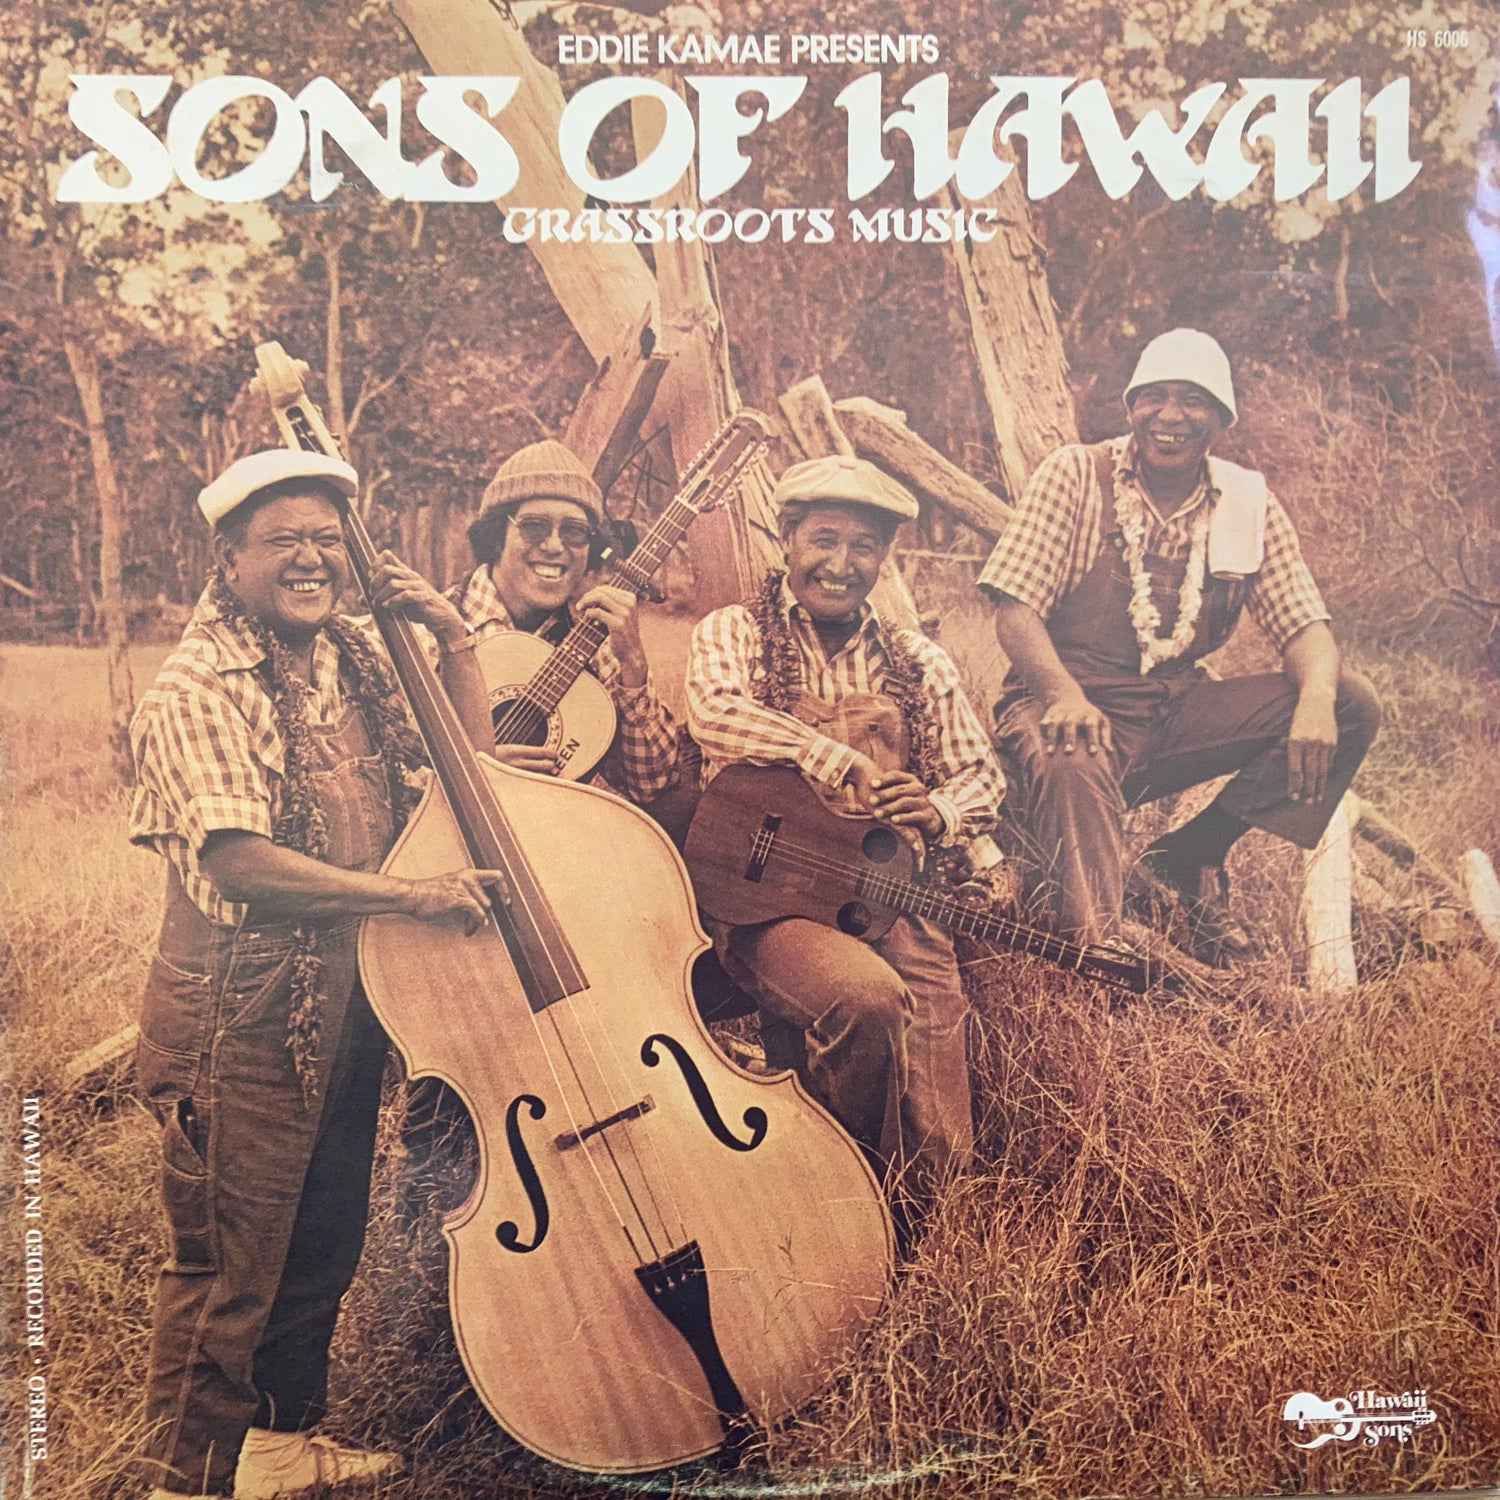 Sons of Hawaii - Grassroots Music